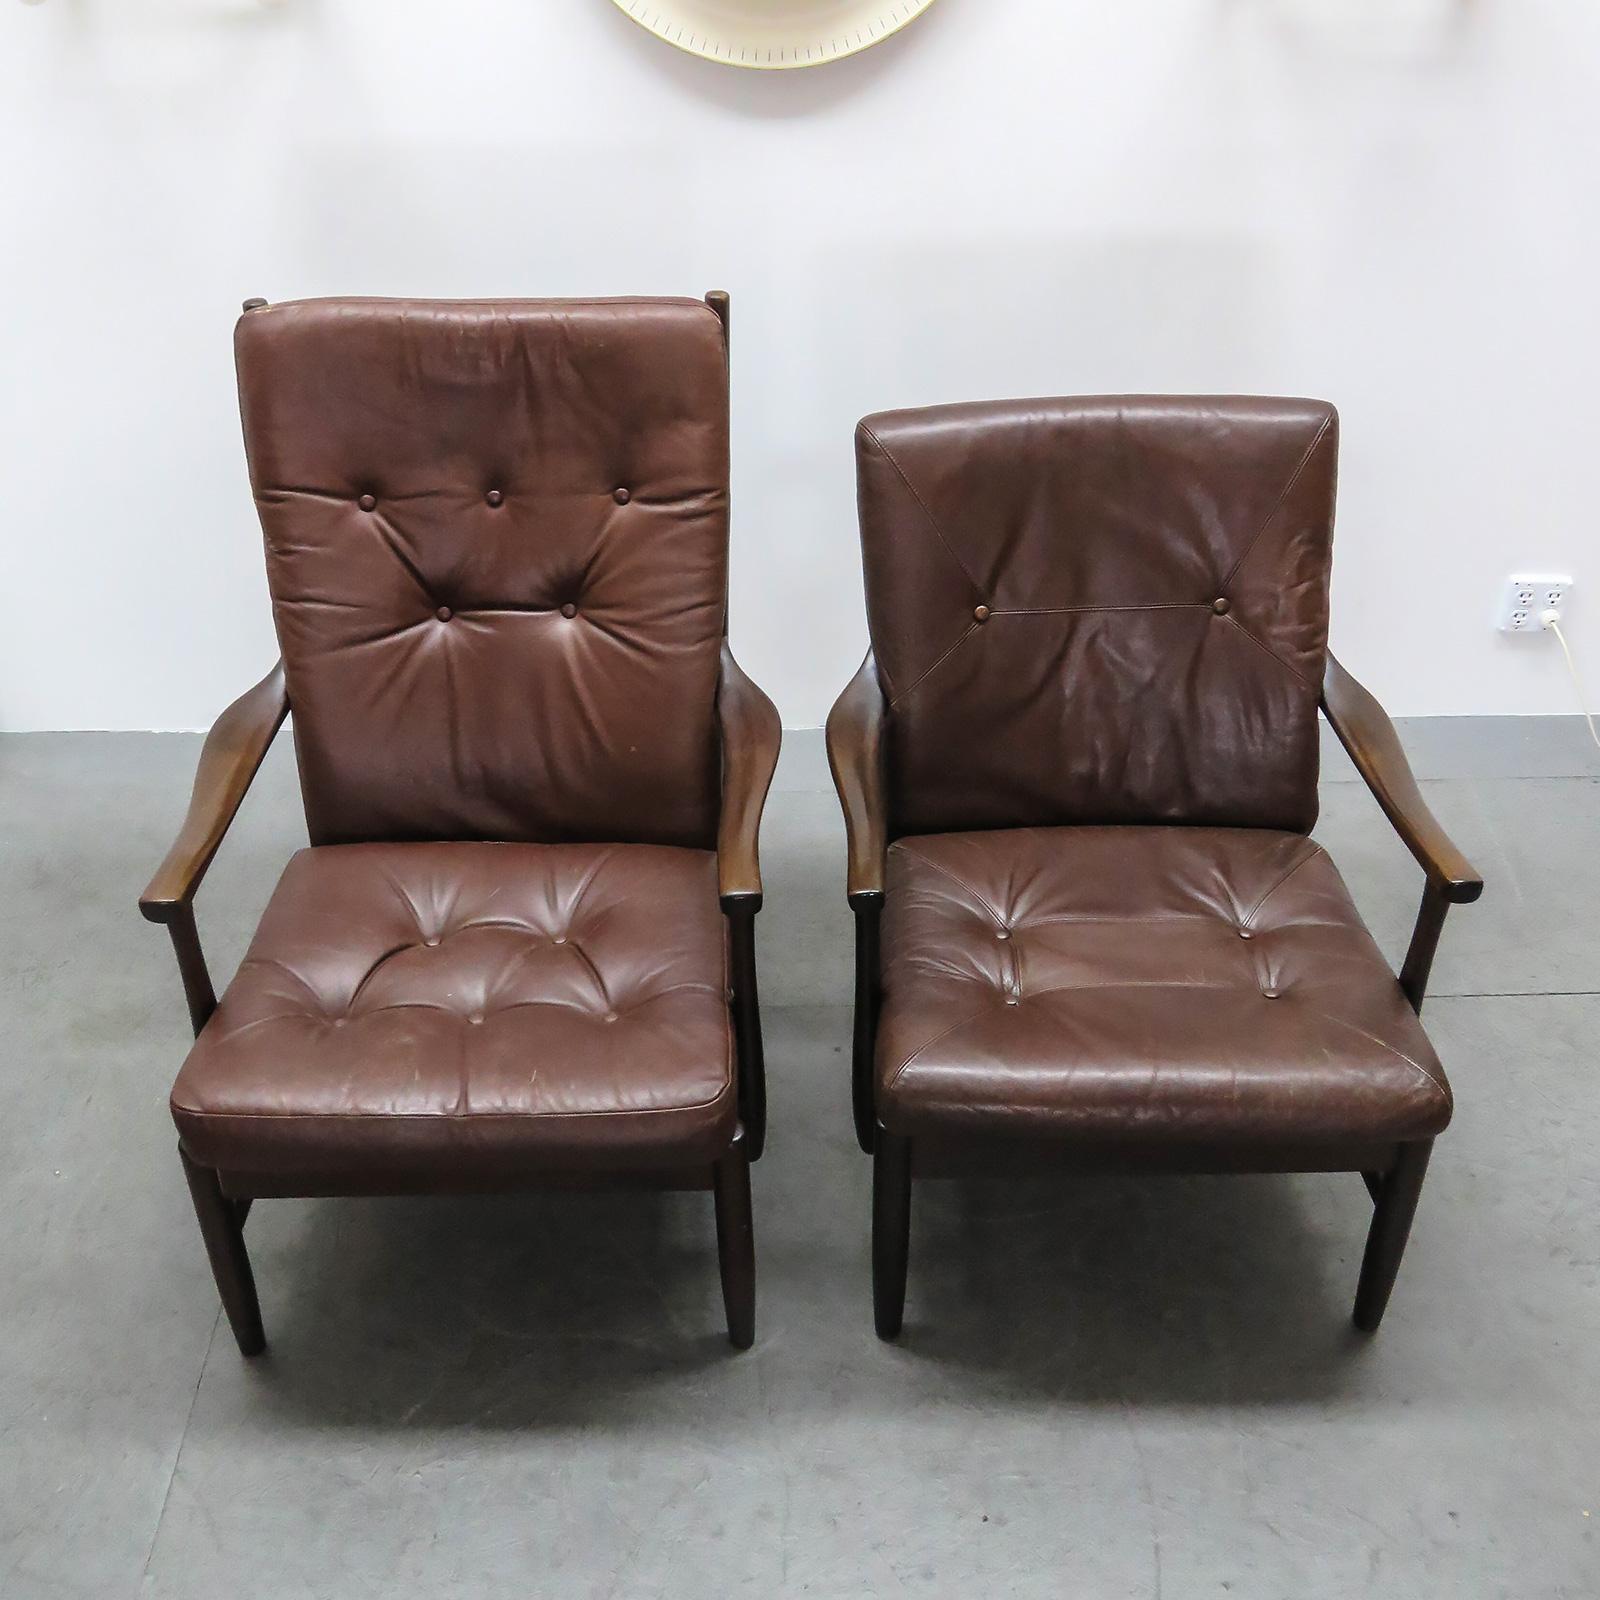 Set of Two Danish Leather Side Chairs, 1950 For Sale 2